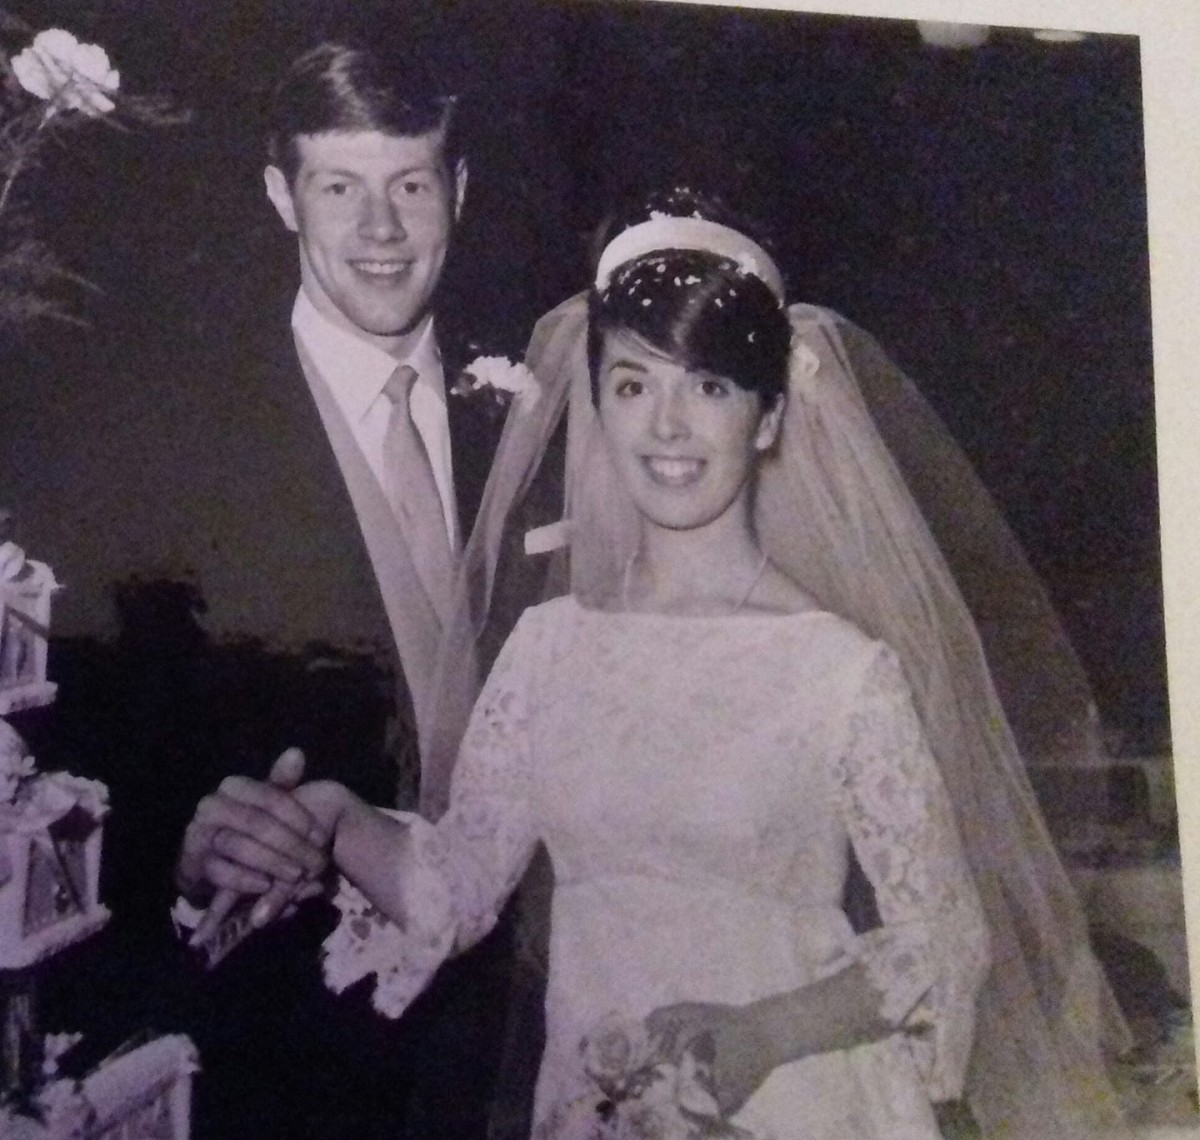 A lovely shot of these newlyweds! Pat and Donald Mackay, married at Methven Parish Church on 19th June 1965.